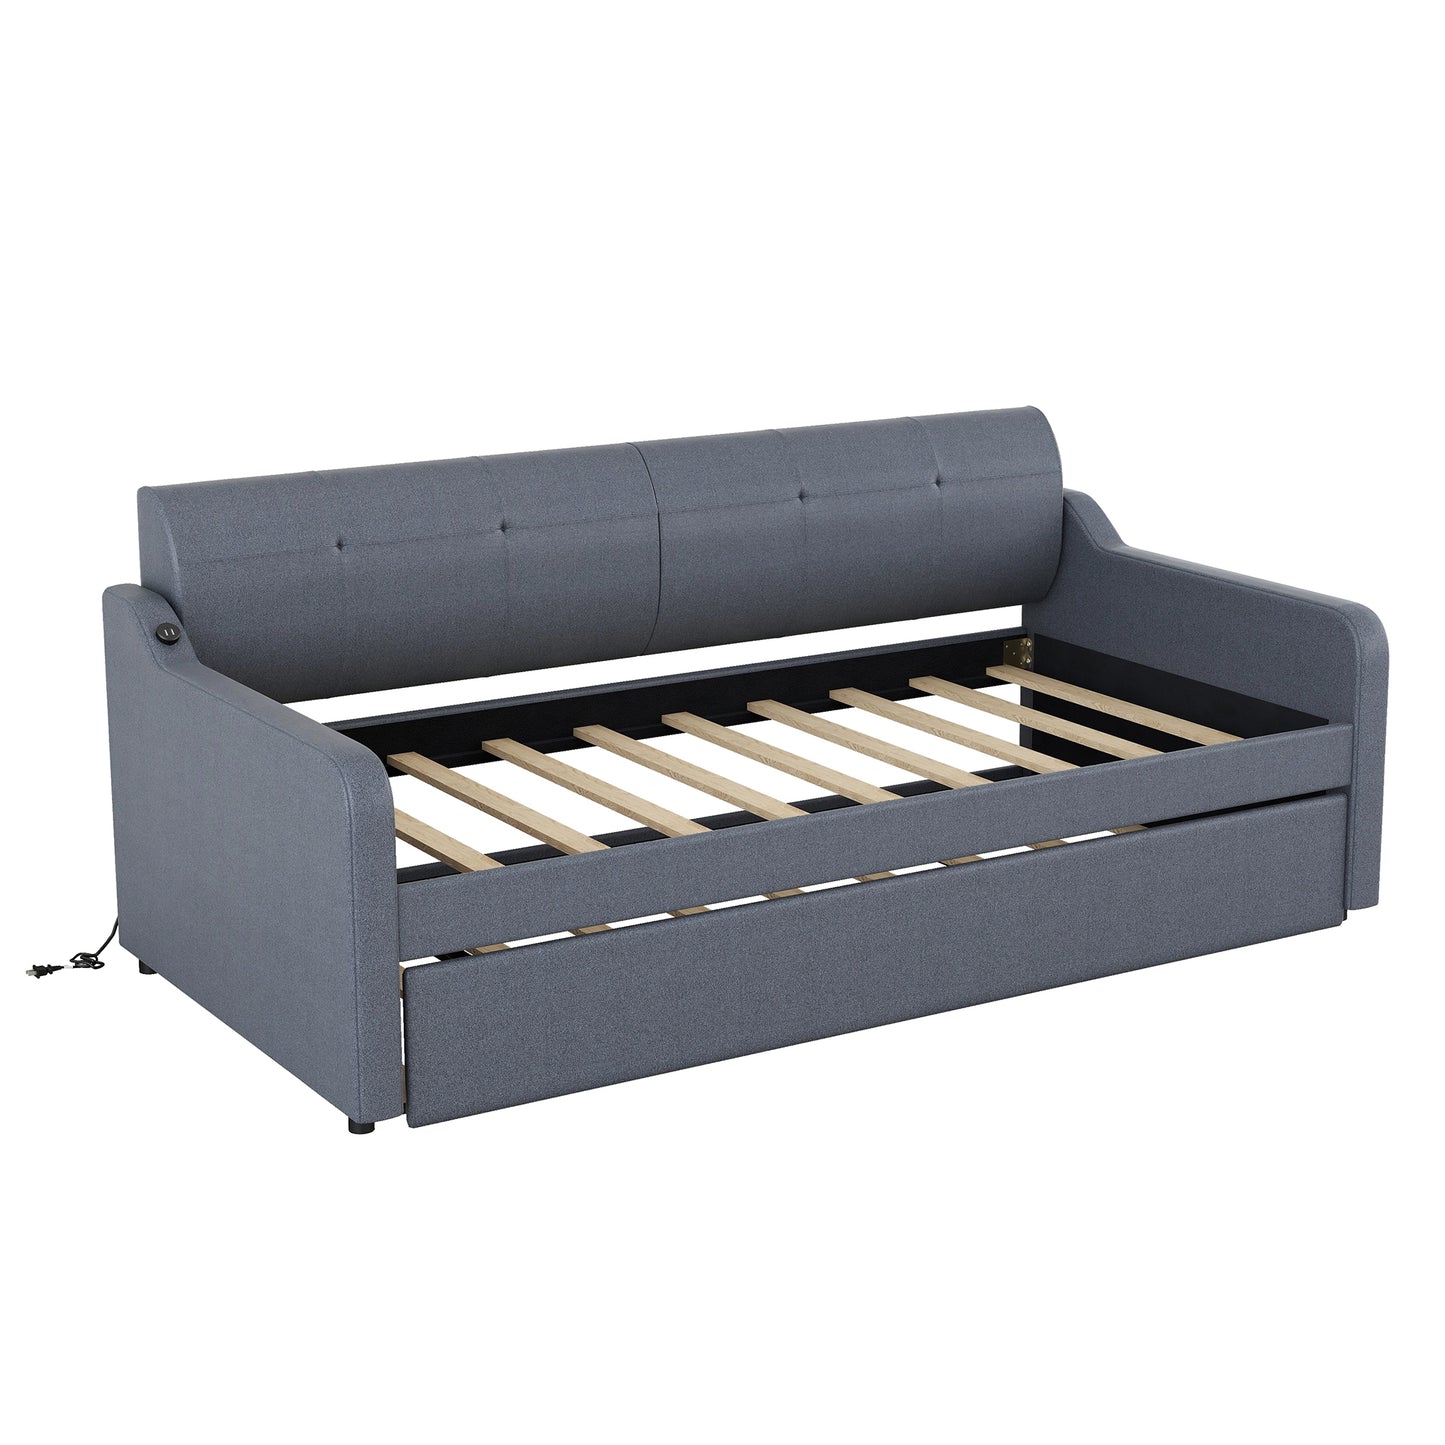 Twin Size Upholstery DayBed with Trundle and USB Charging Design,Trundle can be flat or erected,Gray